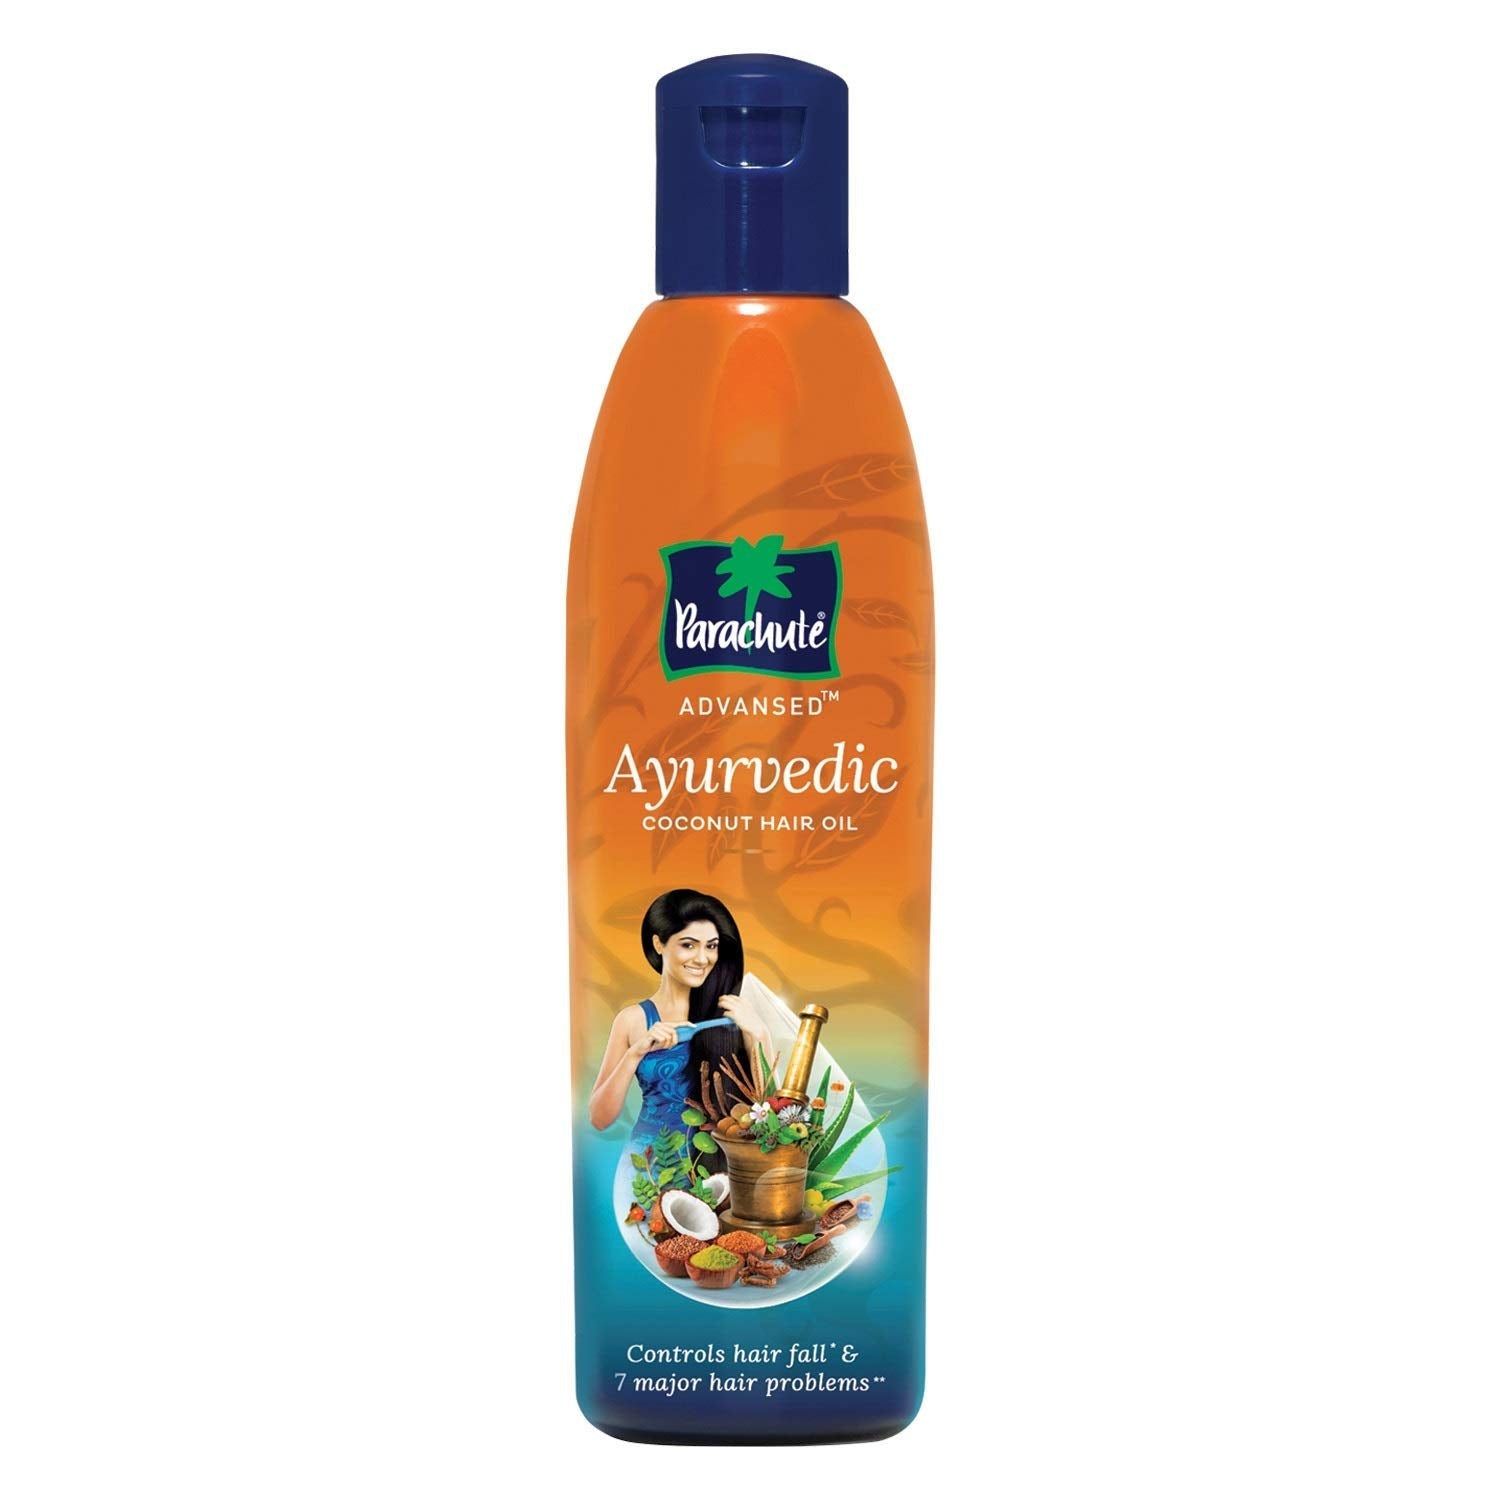 Shop Parachute Advansed Ayurvedic Coconut Hair Oil at price 35.00 from Parachute Online - Ayush Care